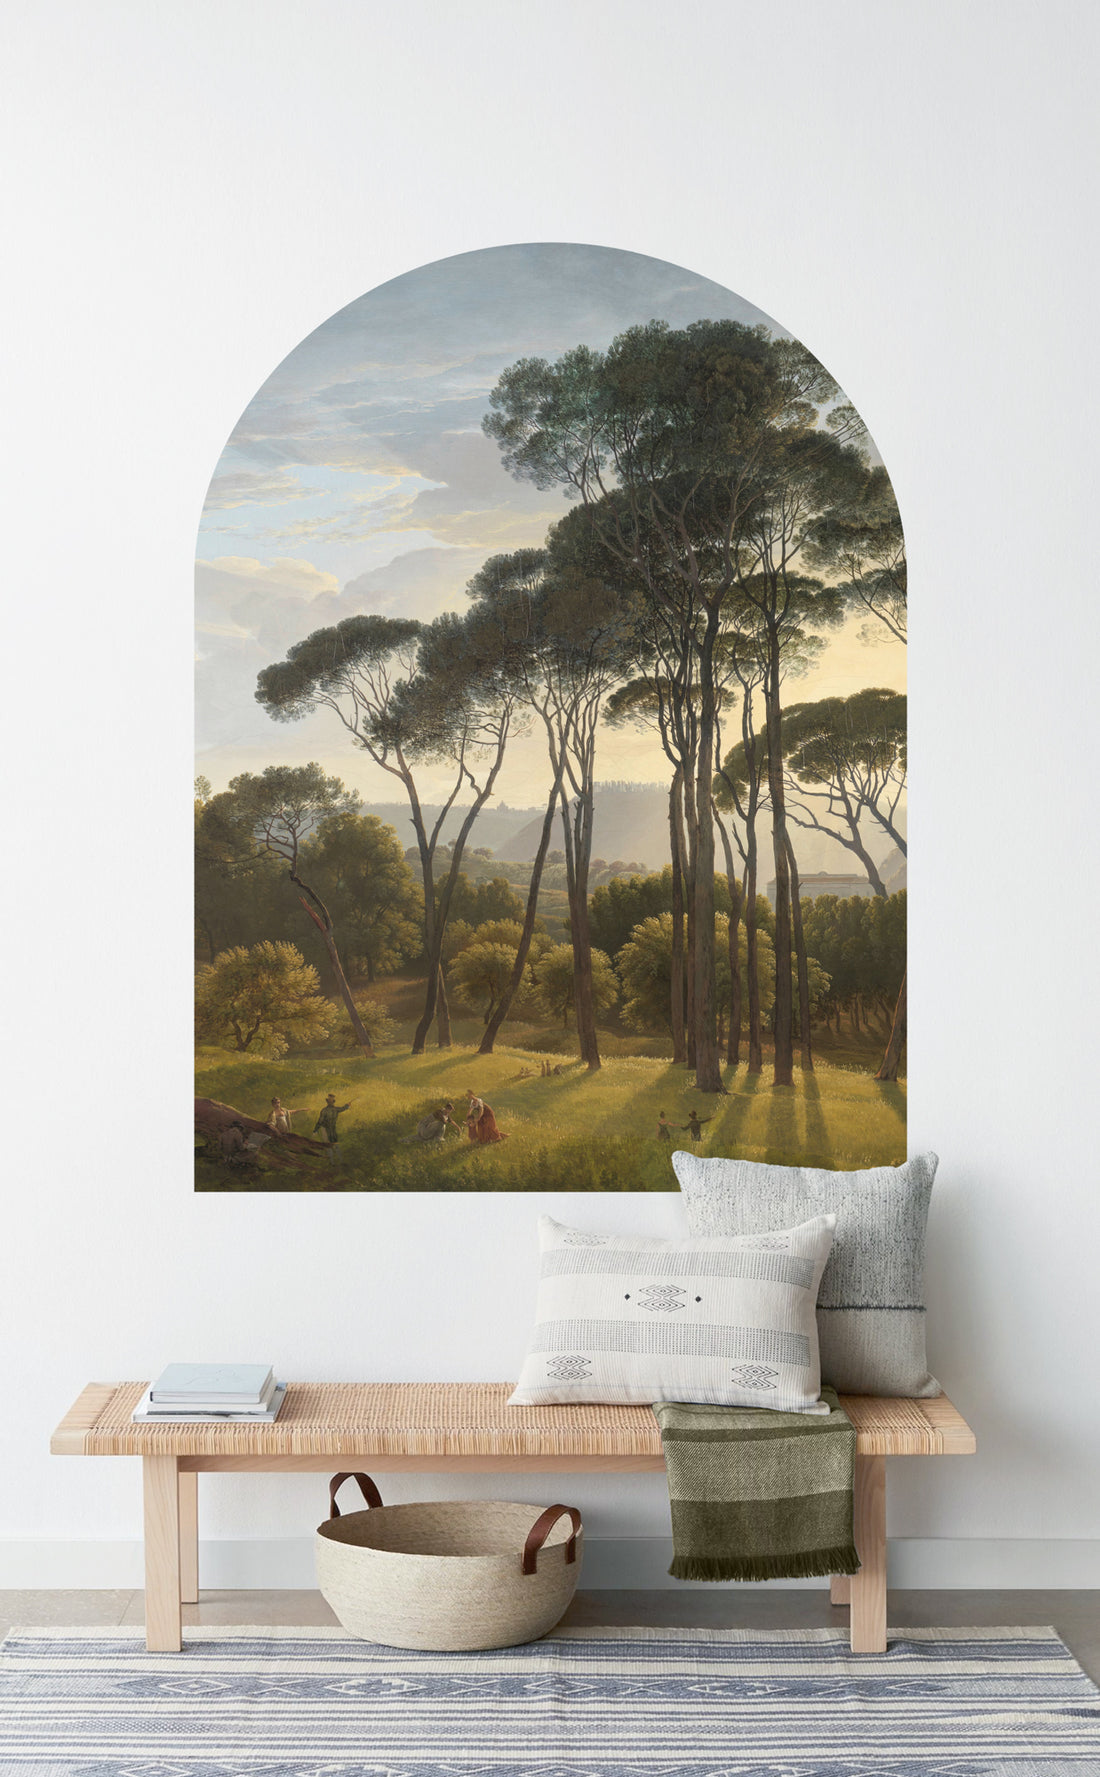 Window into Renaissance II Wall Decal Your Decal Shop Wall Decal NZ